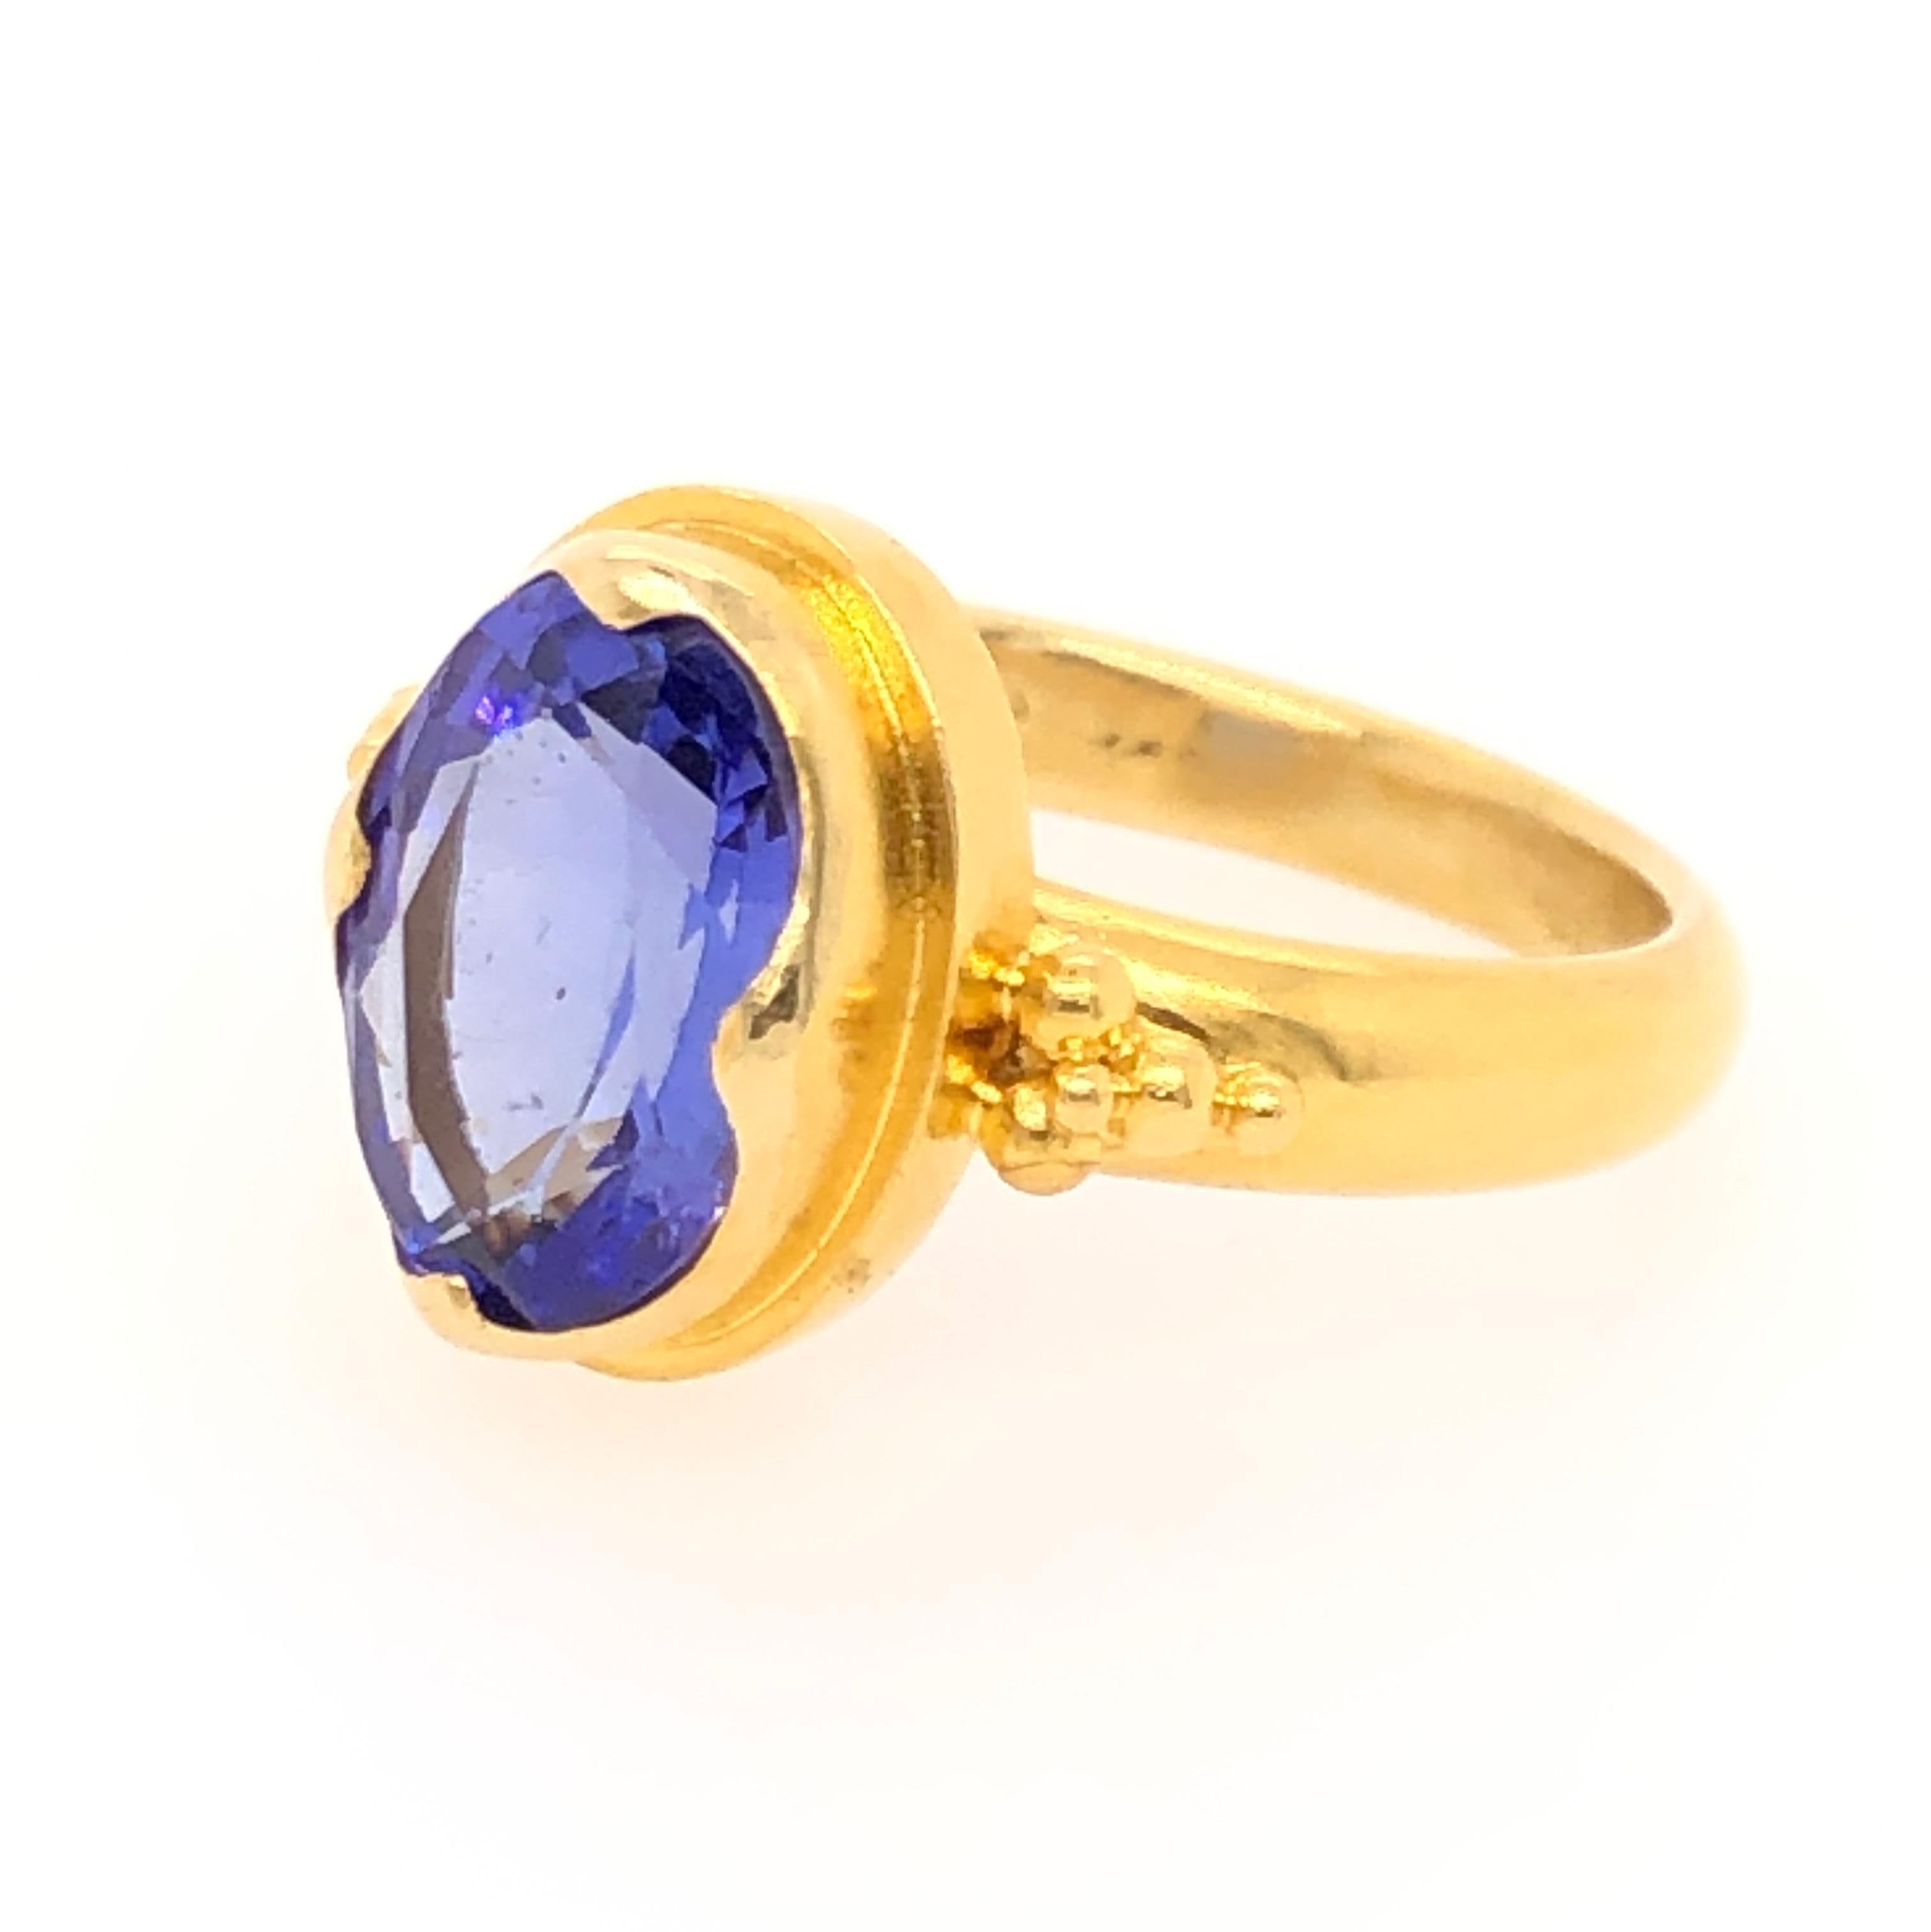 Tanzanite, named after the country Tanzania, is a relatively newly discovered semiprecious stone. Tiffany's is credited with introducing it to the market in 1968, and since then designers have turned to tanzanite for its beautiful colors (most